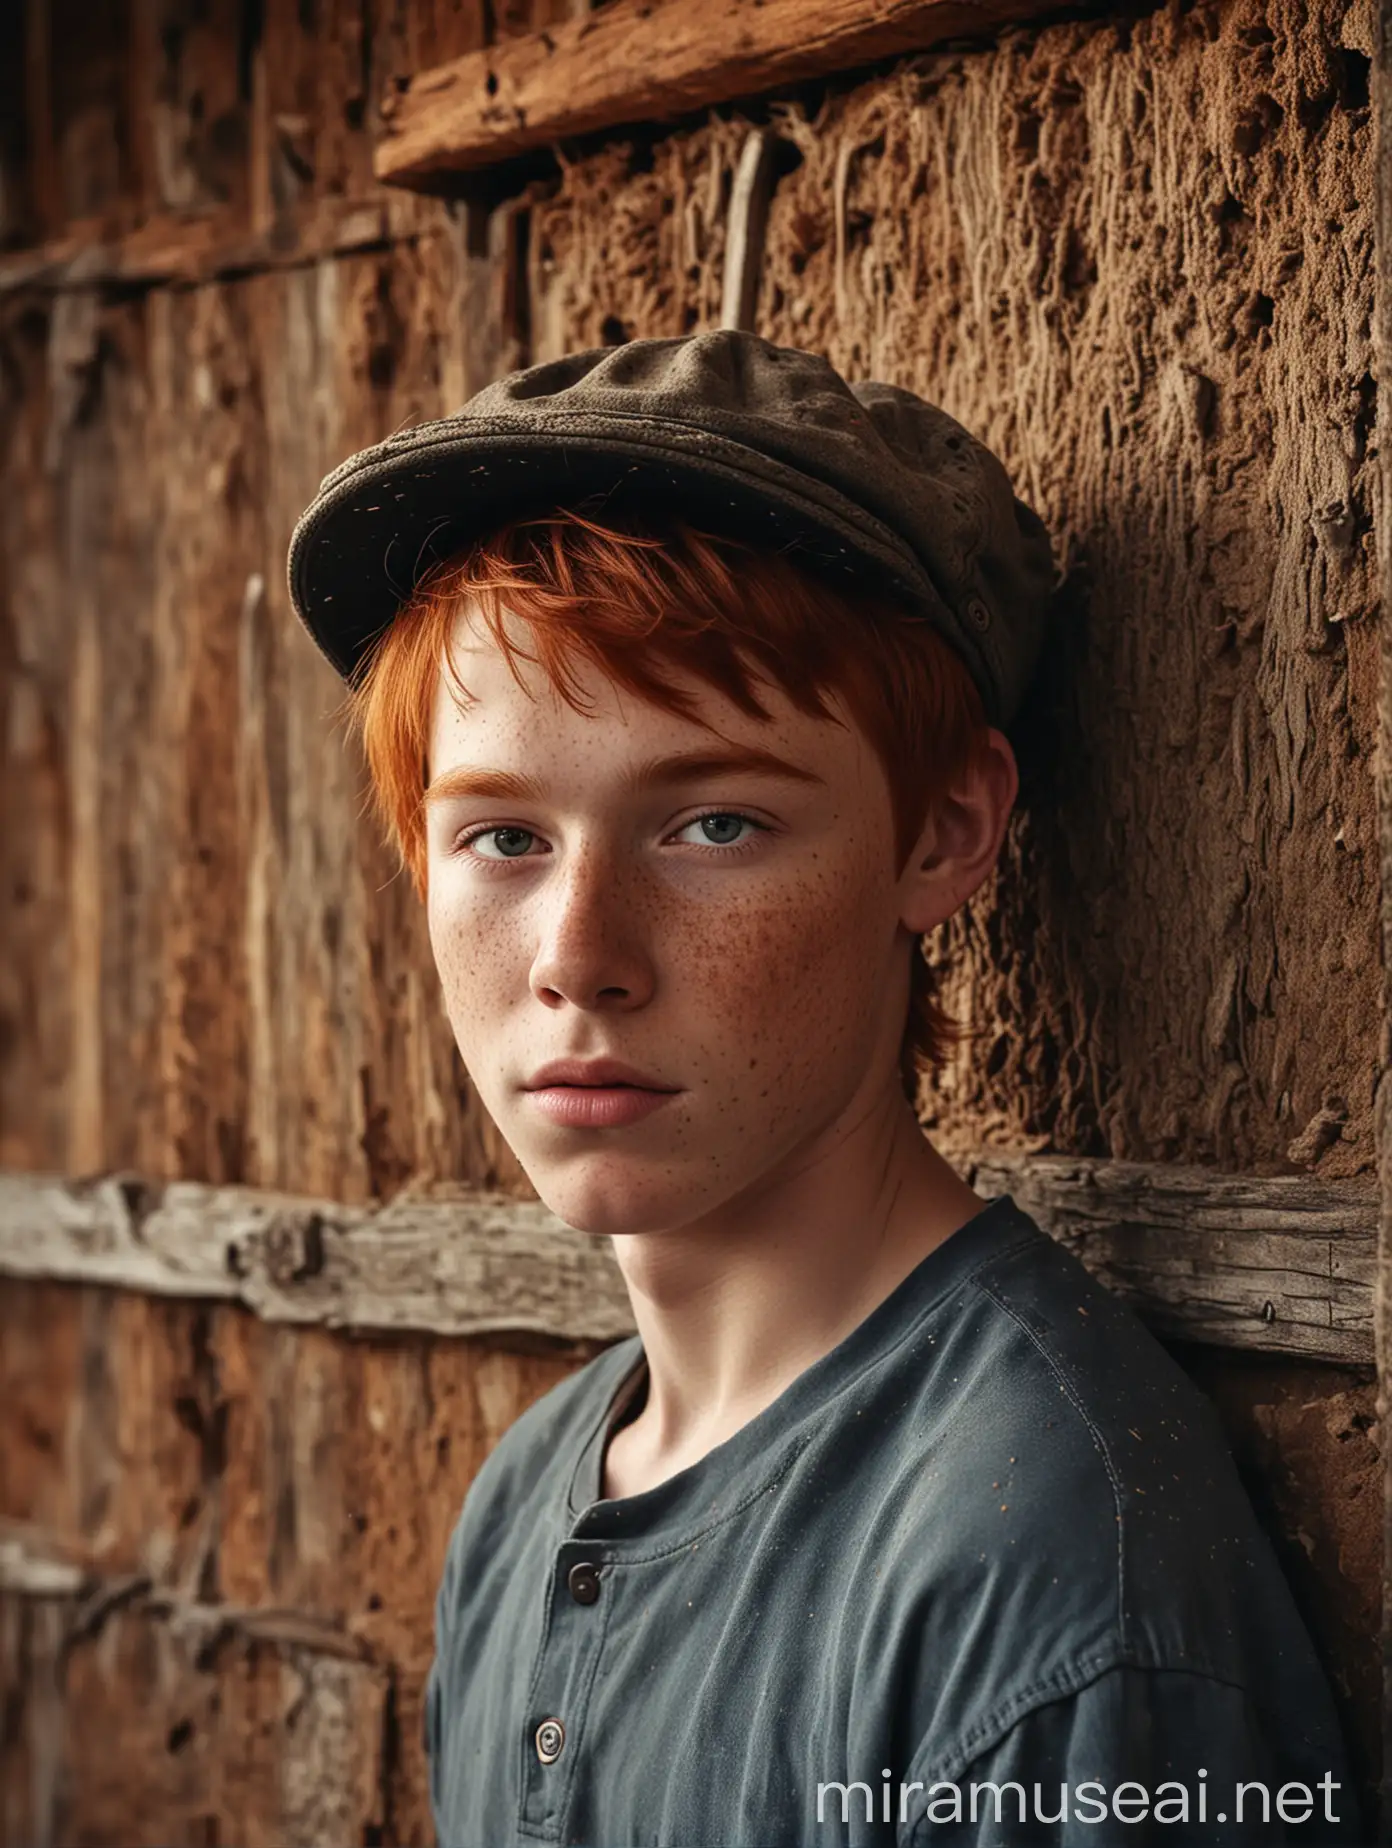 Portrait of a Freckled RedHaired Boy in Front of an Old Barn